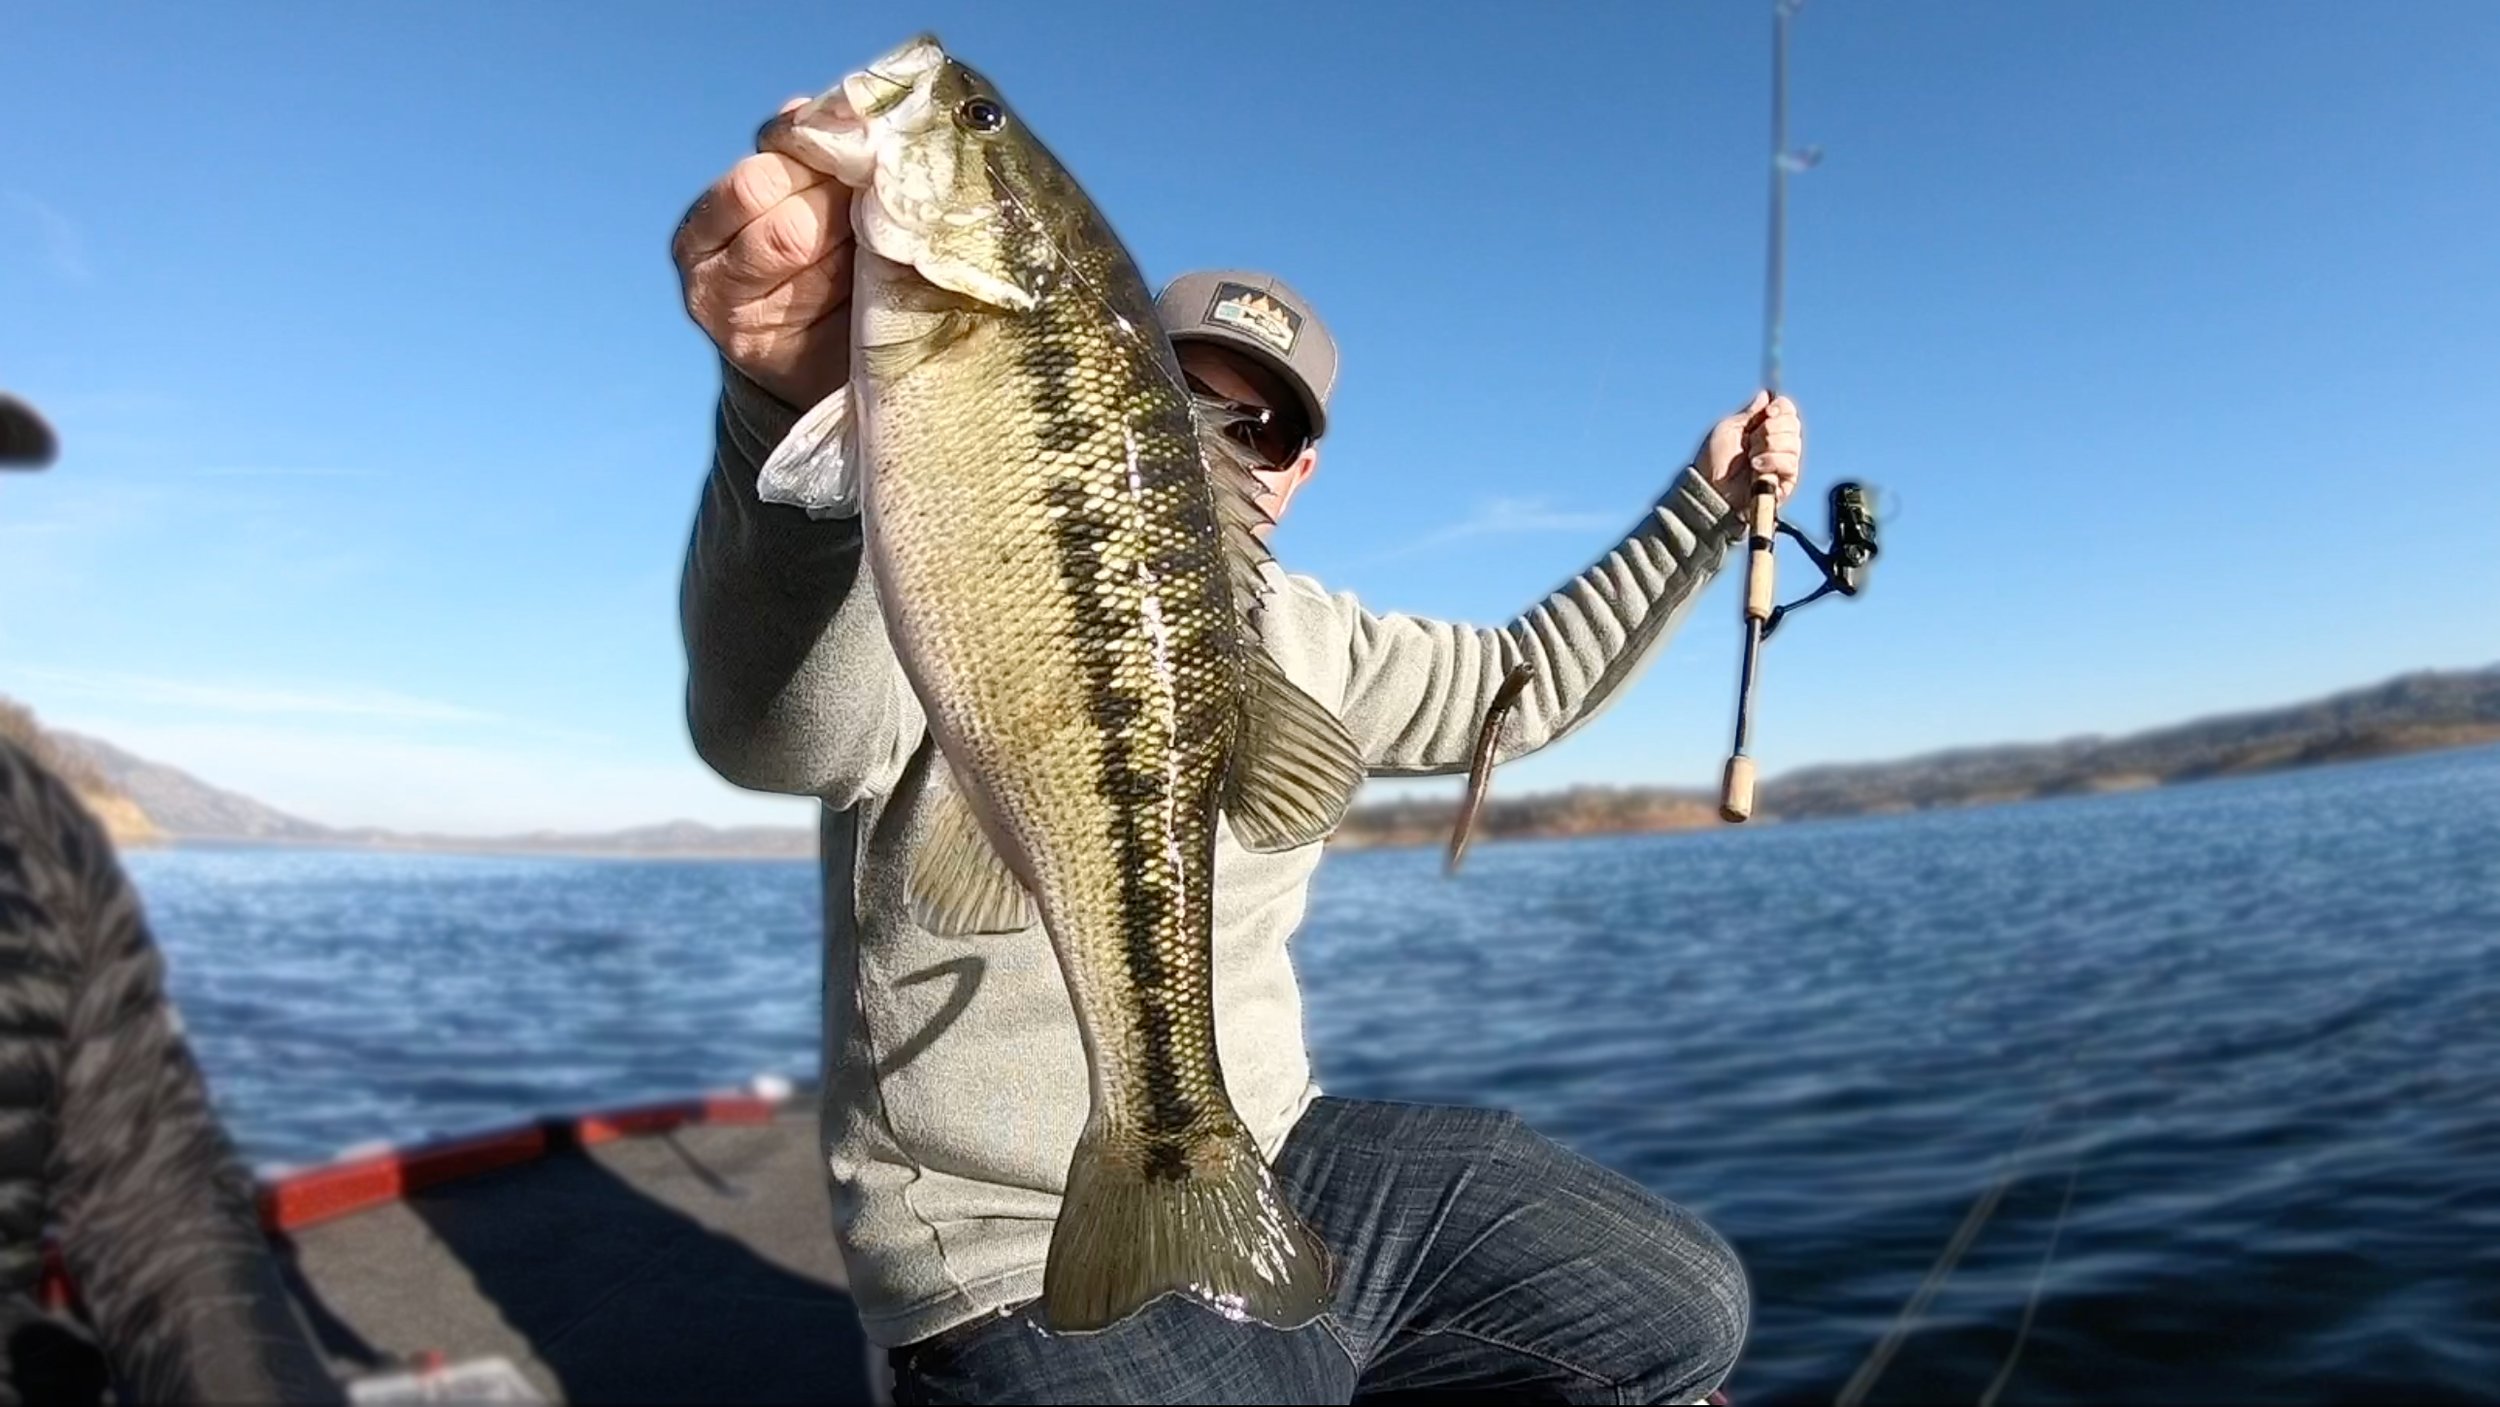 Neko Rig Fishing: Everything You Need To Know To Catch Bass